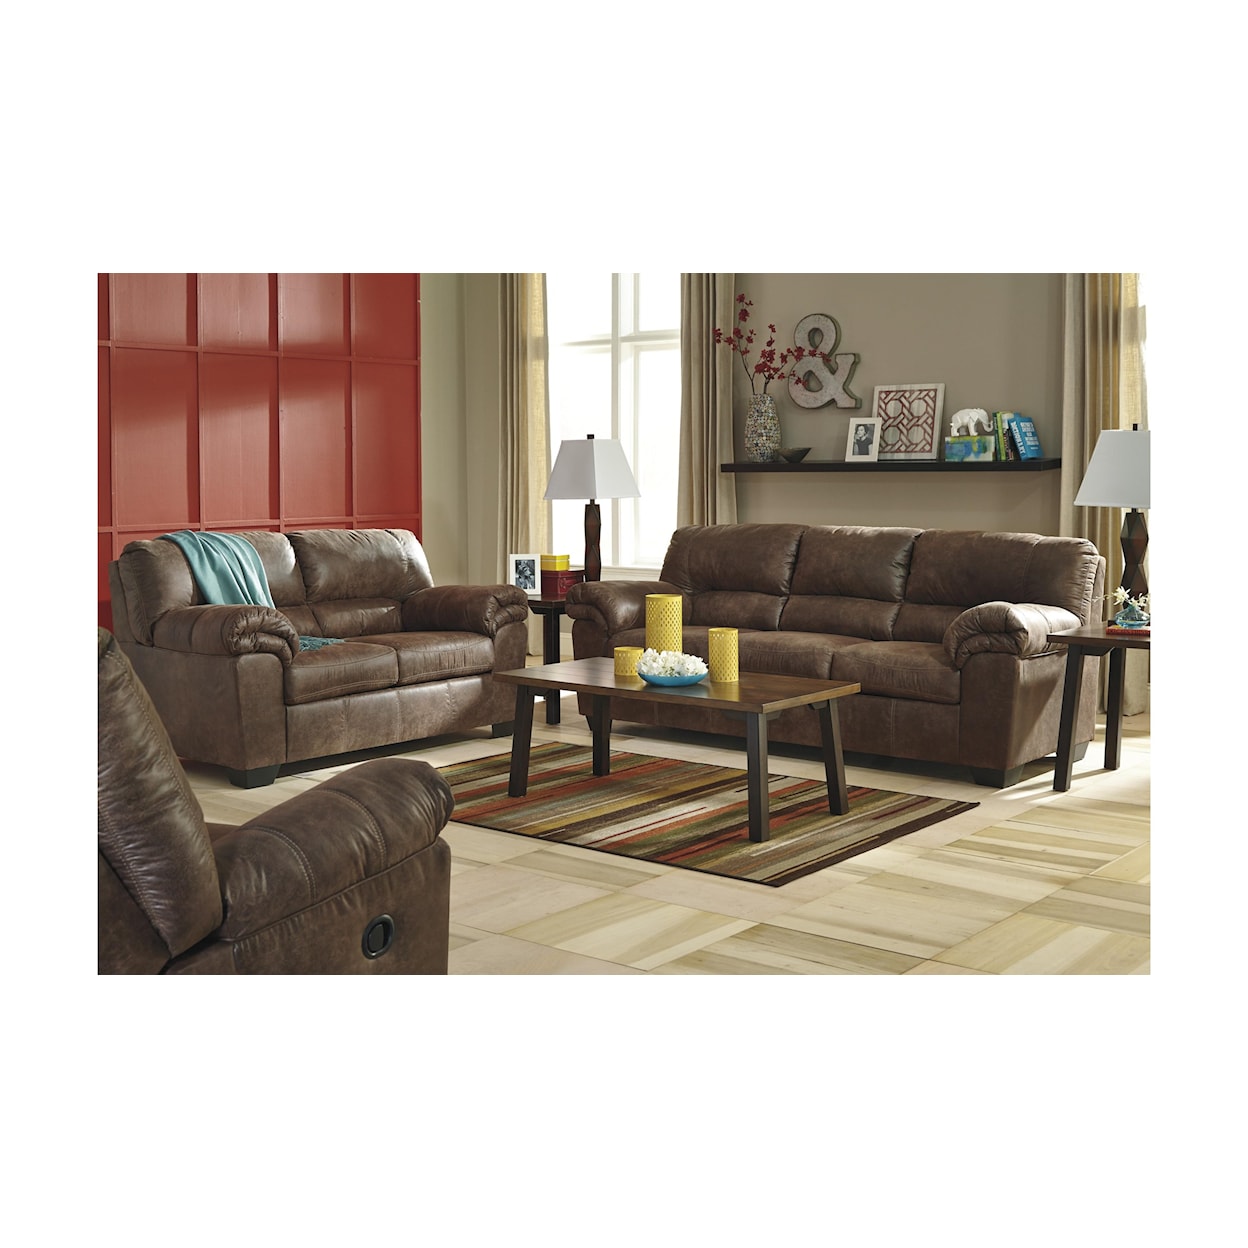 Signature Design by Ashley Bladen Sofa, Loveseat, and Recliner